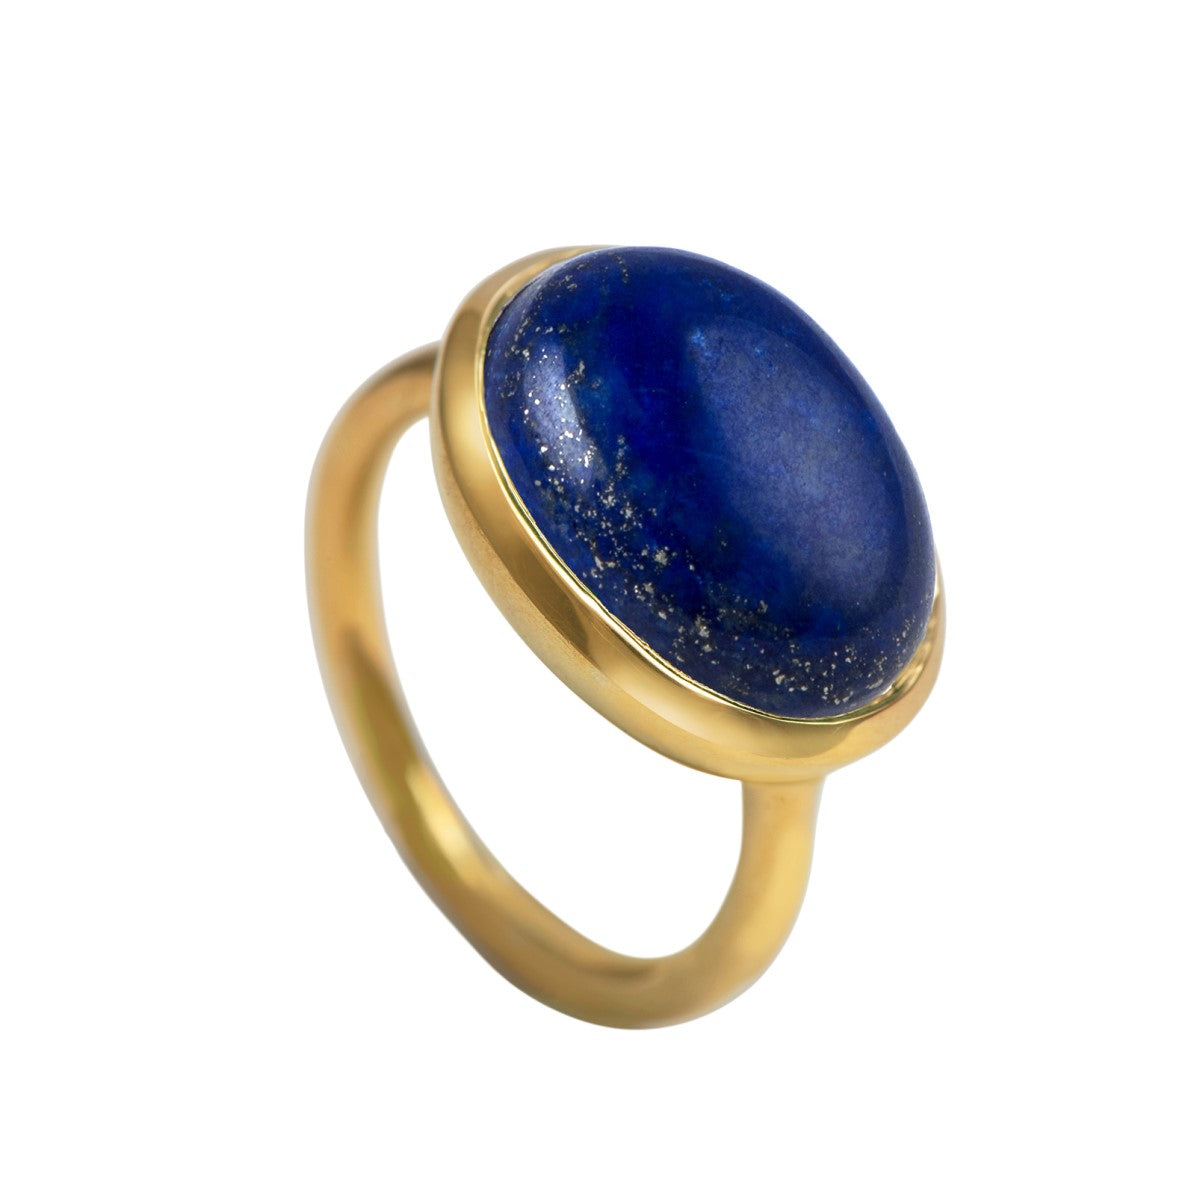 Cabochon Oval Cut Natural Gemstone Gold Plated Sterling Silver Ring - Lapis Lazuli